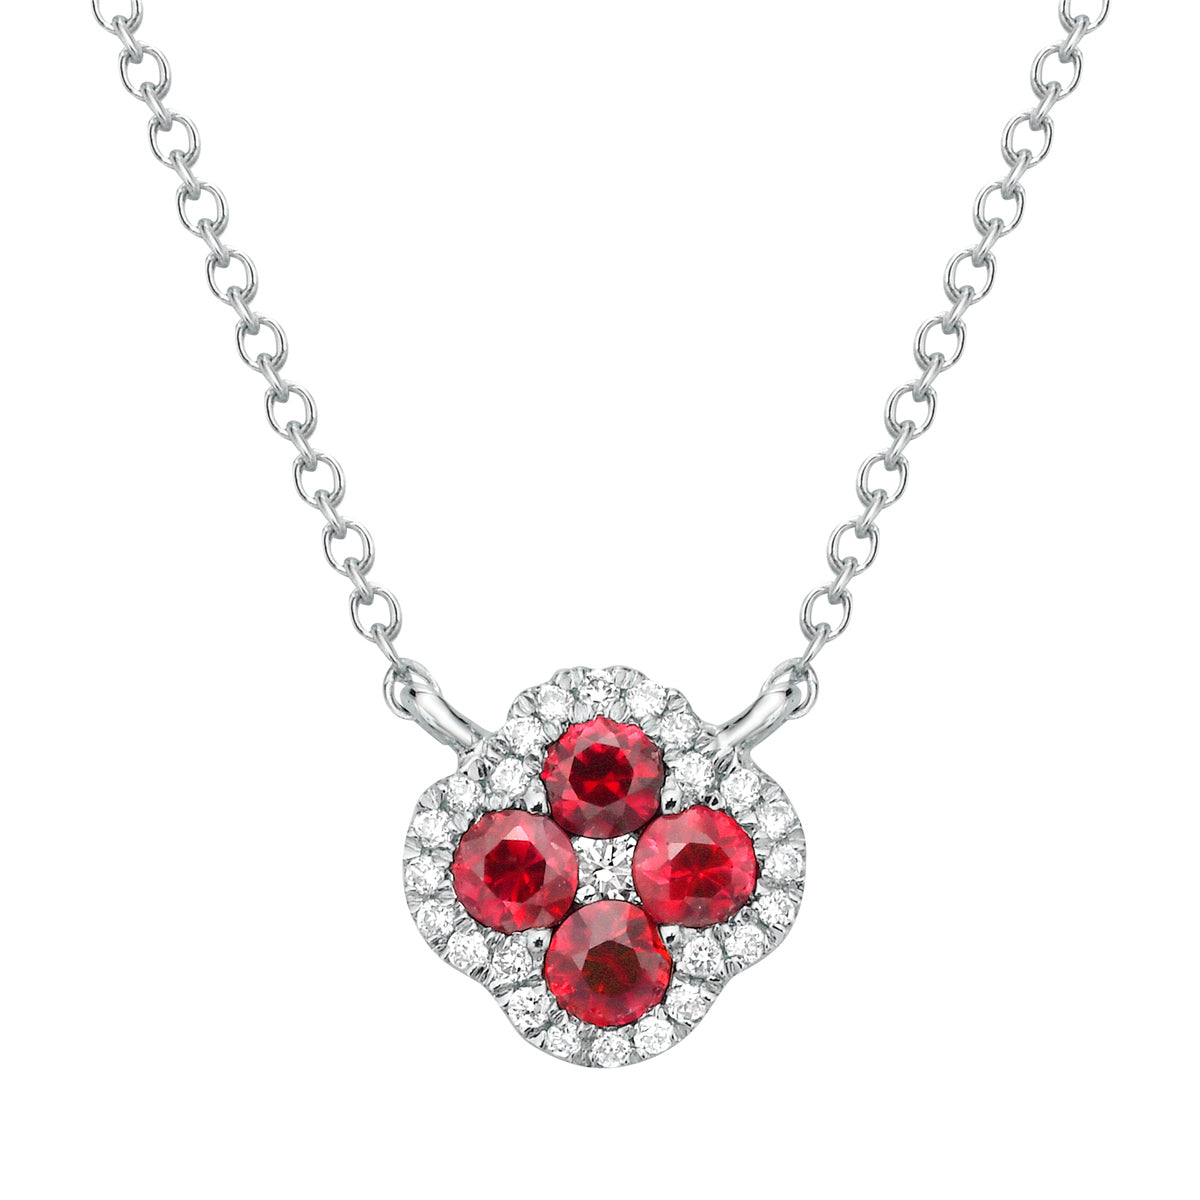 Necklace 14KW/0.4G 4RUBY-0.21CT 25RD-0.05CT